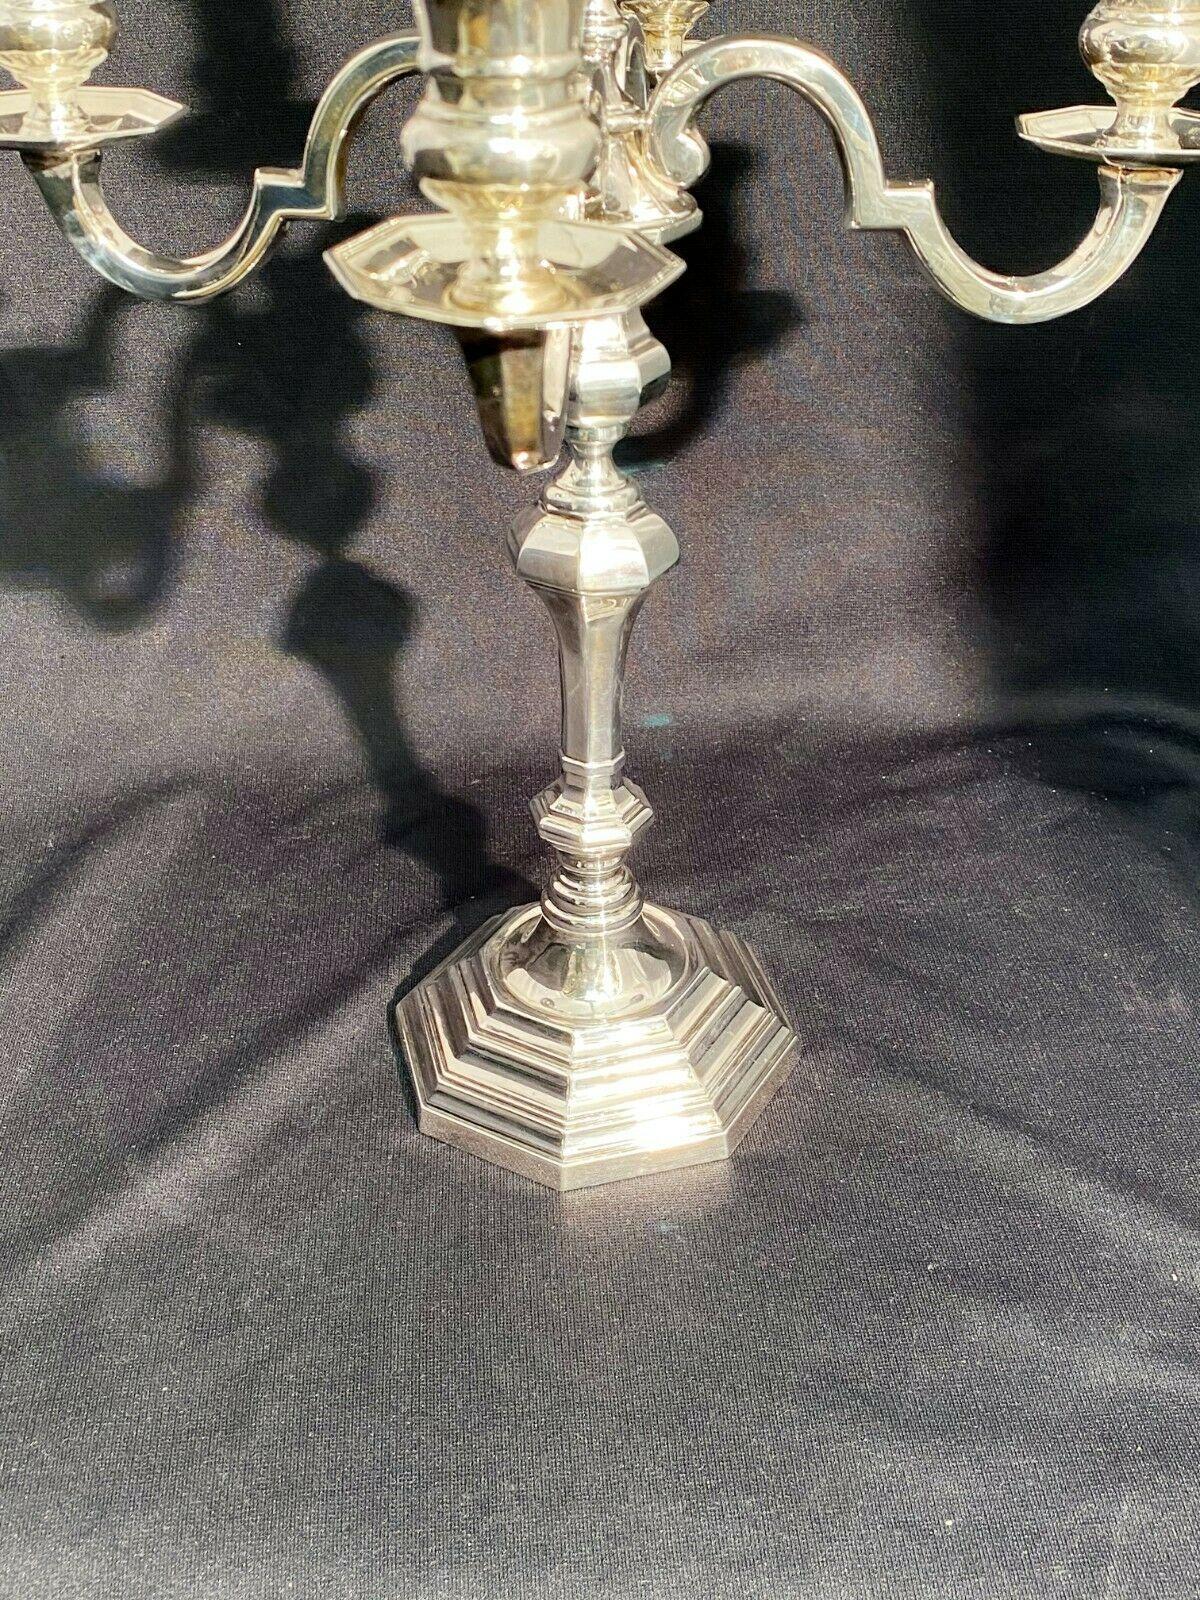 Sterling silver 5 light candelabra by the famous Italian silversmith Pampaloni in desirable Art Deco style. Measures 16 inches tall and 12 inches across. Weighted but gross weight is 36.8 troy oz. Bearing hallmarks as shown.

Pampaloni is a